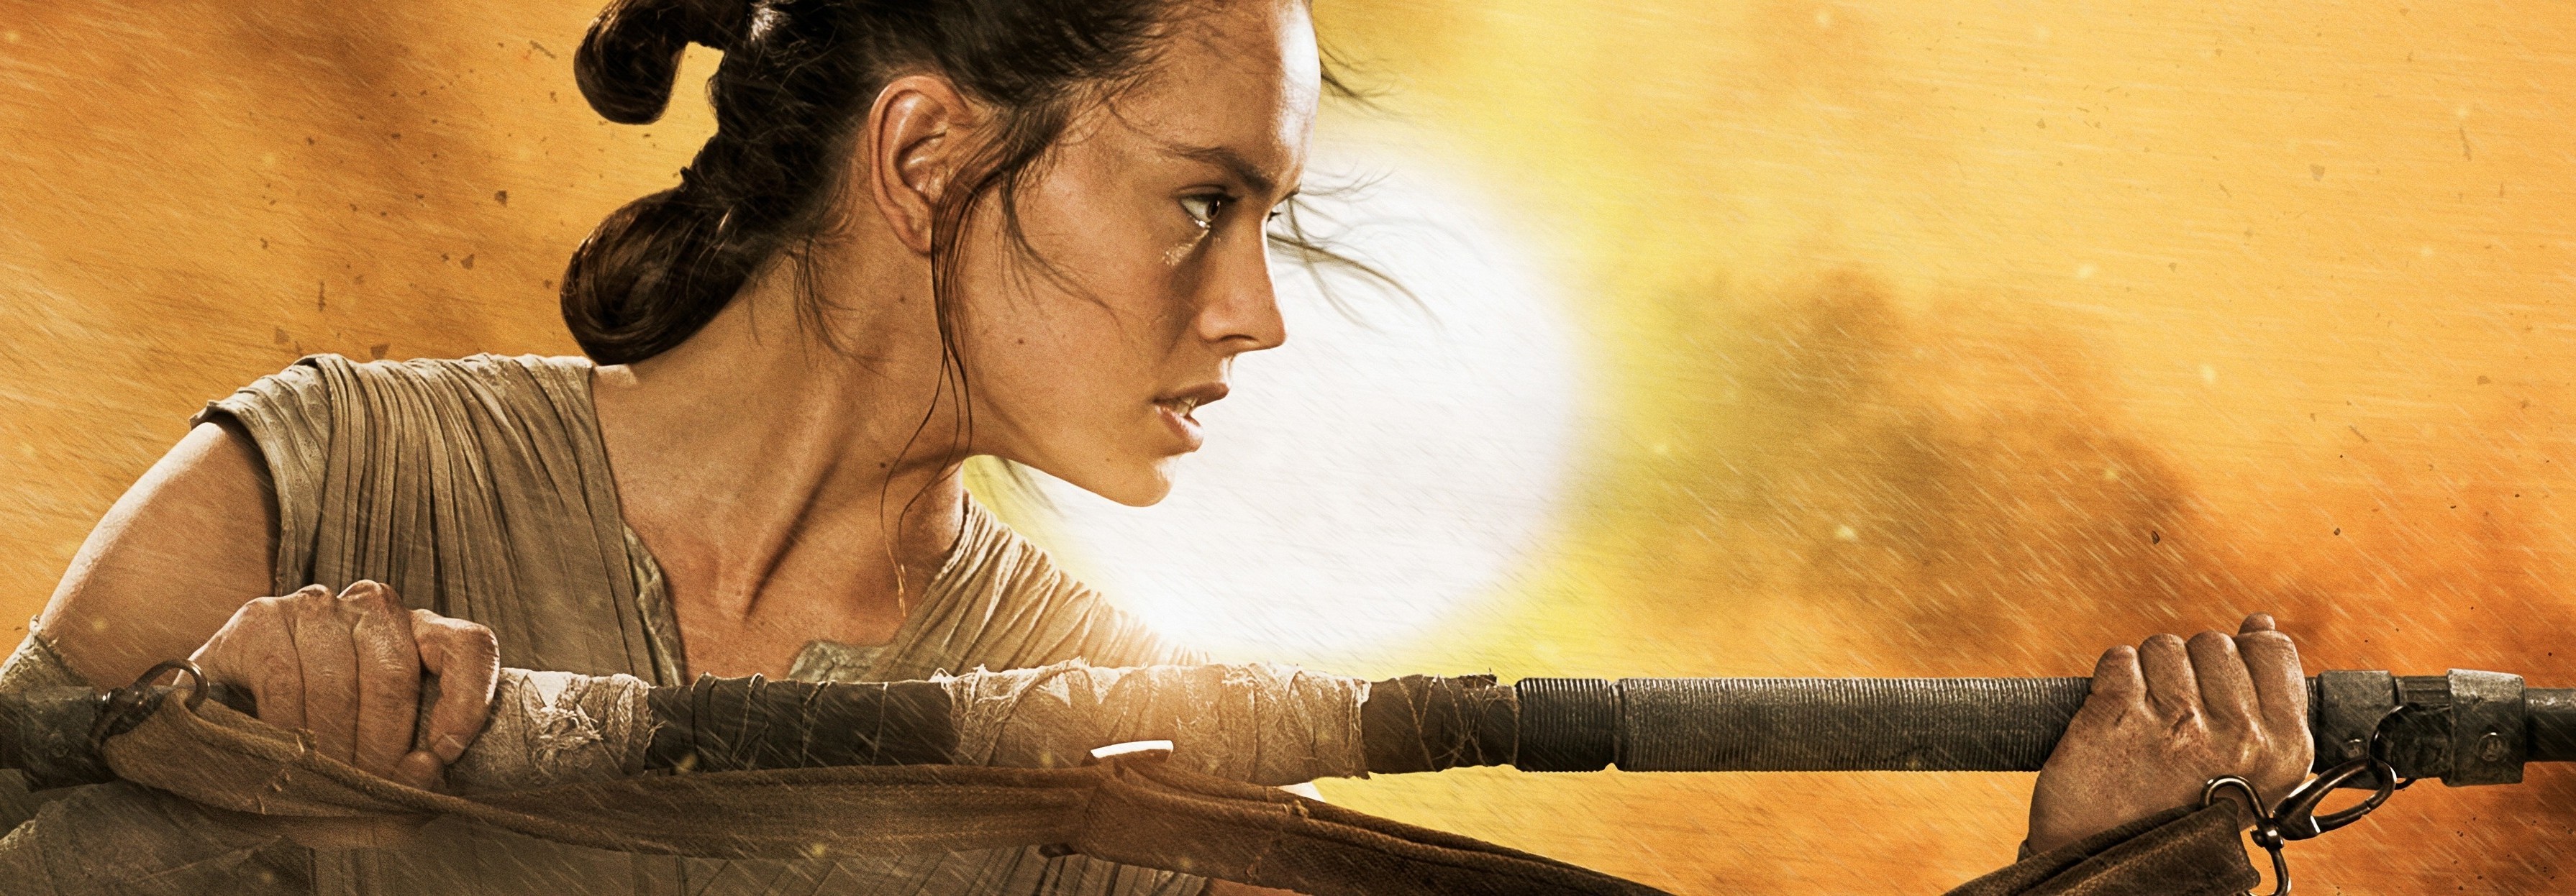 3581x1246 Star Wars: Episode VII The Force Awakens, Movies, Daisy Ridley Wallpapers  HD / Desktop and Mobile Backgrounds